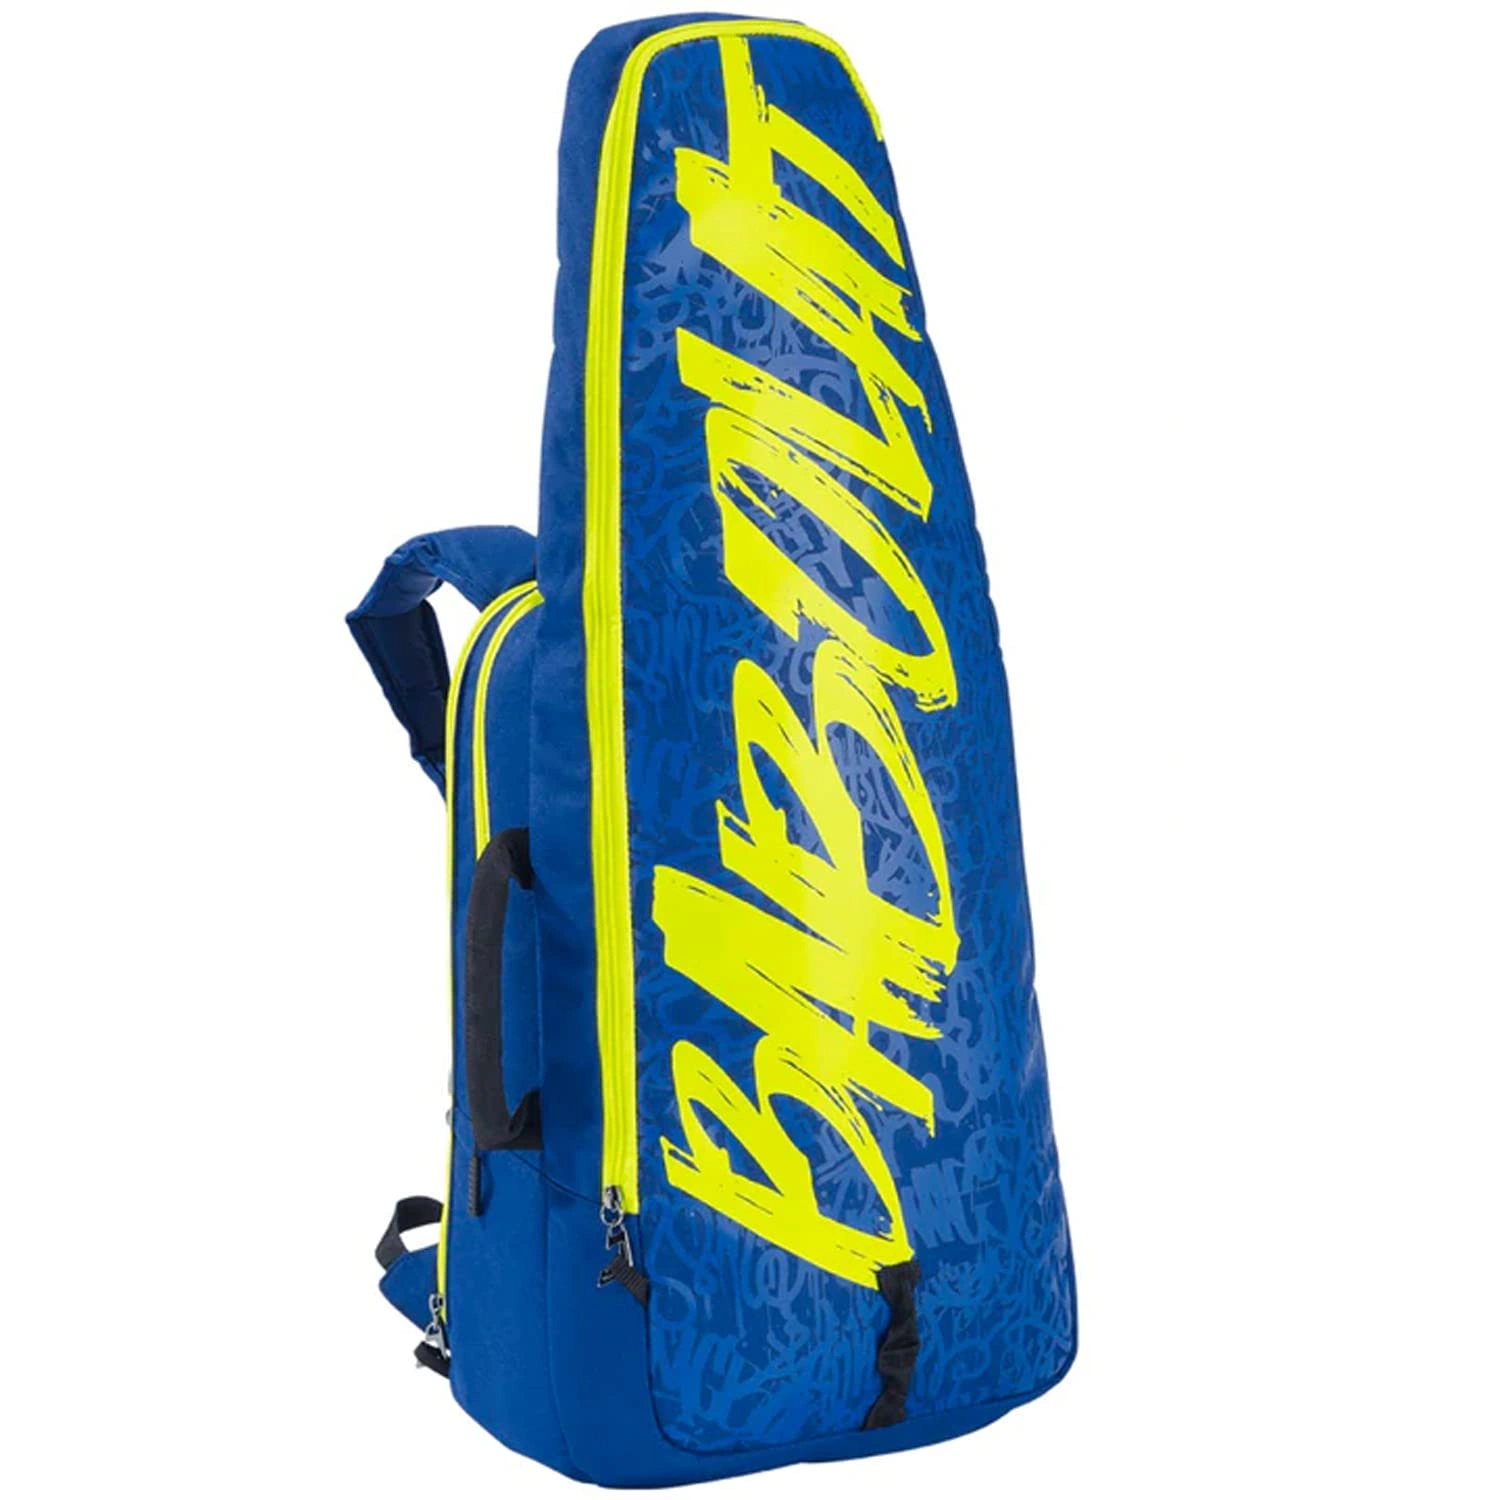 Babolat Tournament Badminton Backpack: Transform into a Racket Holder with Multiple Compartments for Organized Gear-NAVY BLUE GREEN-2